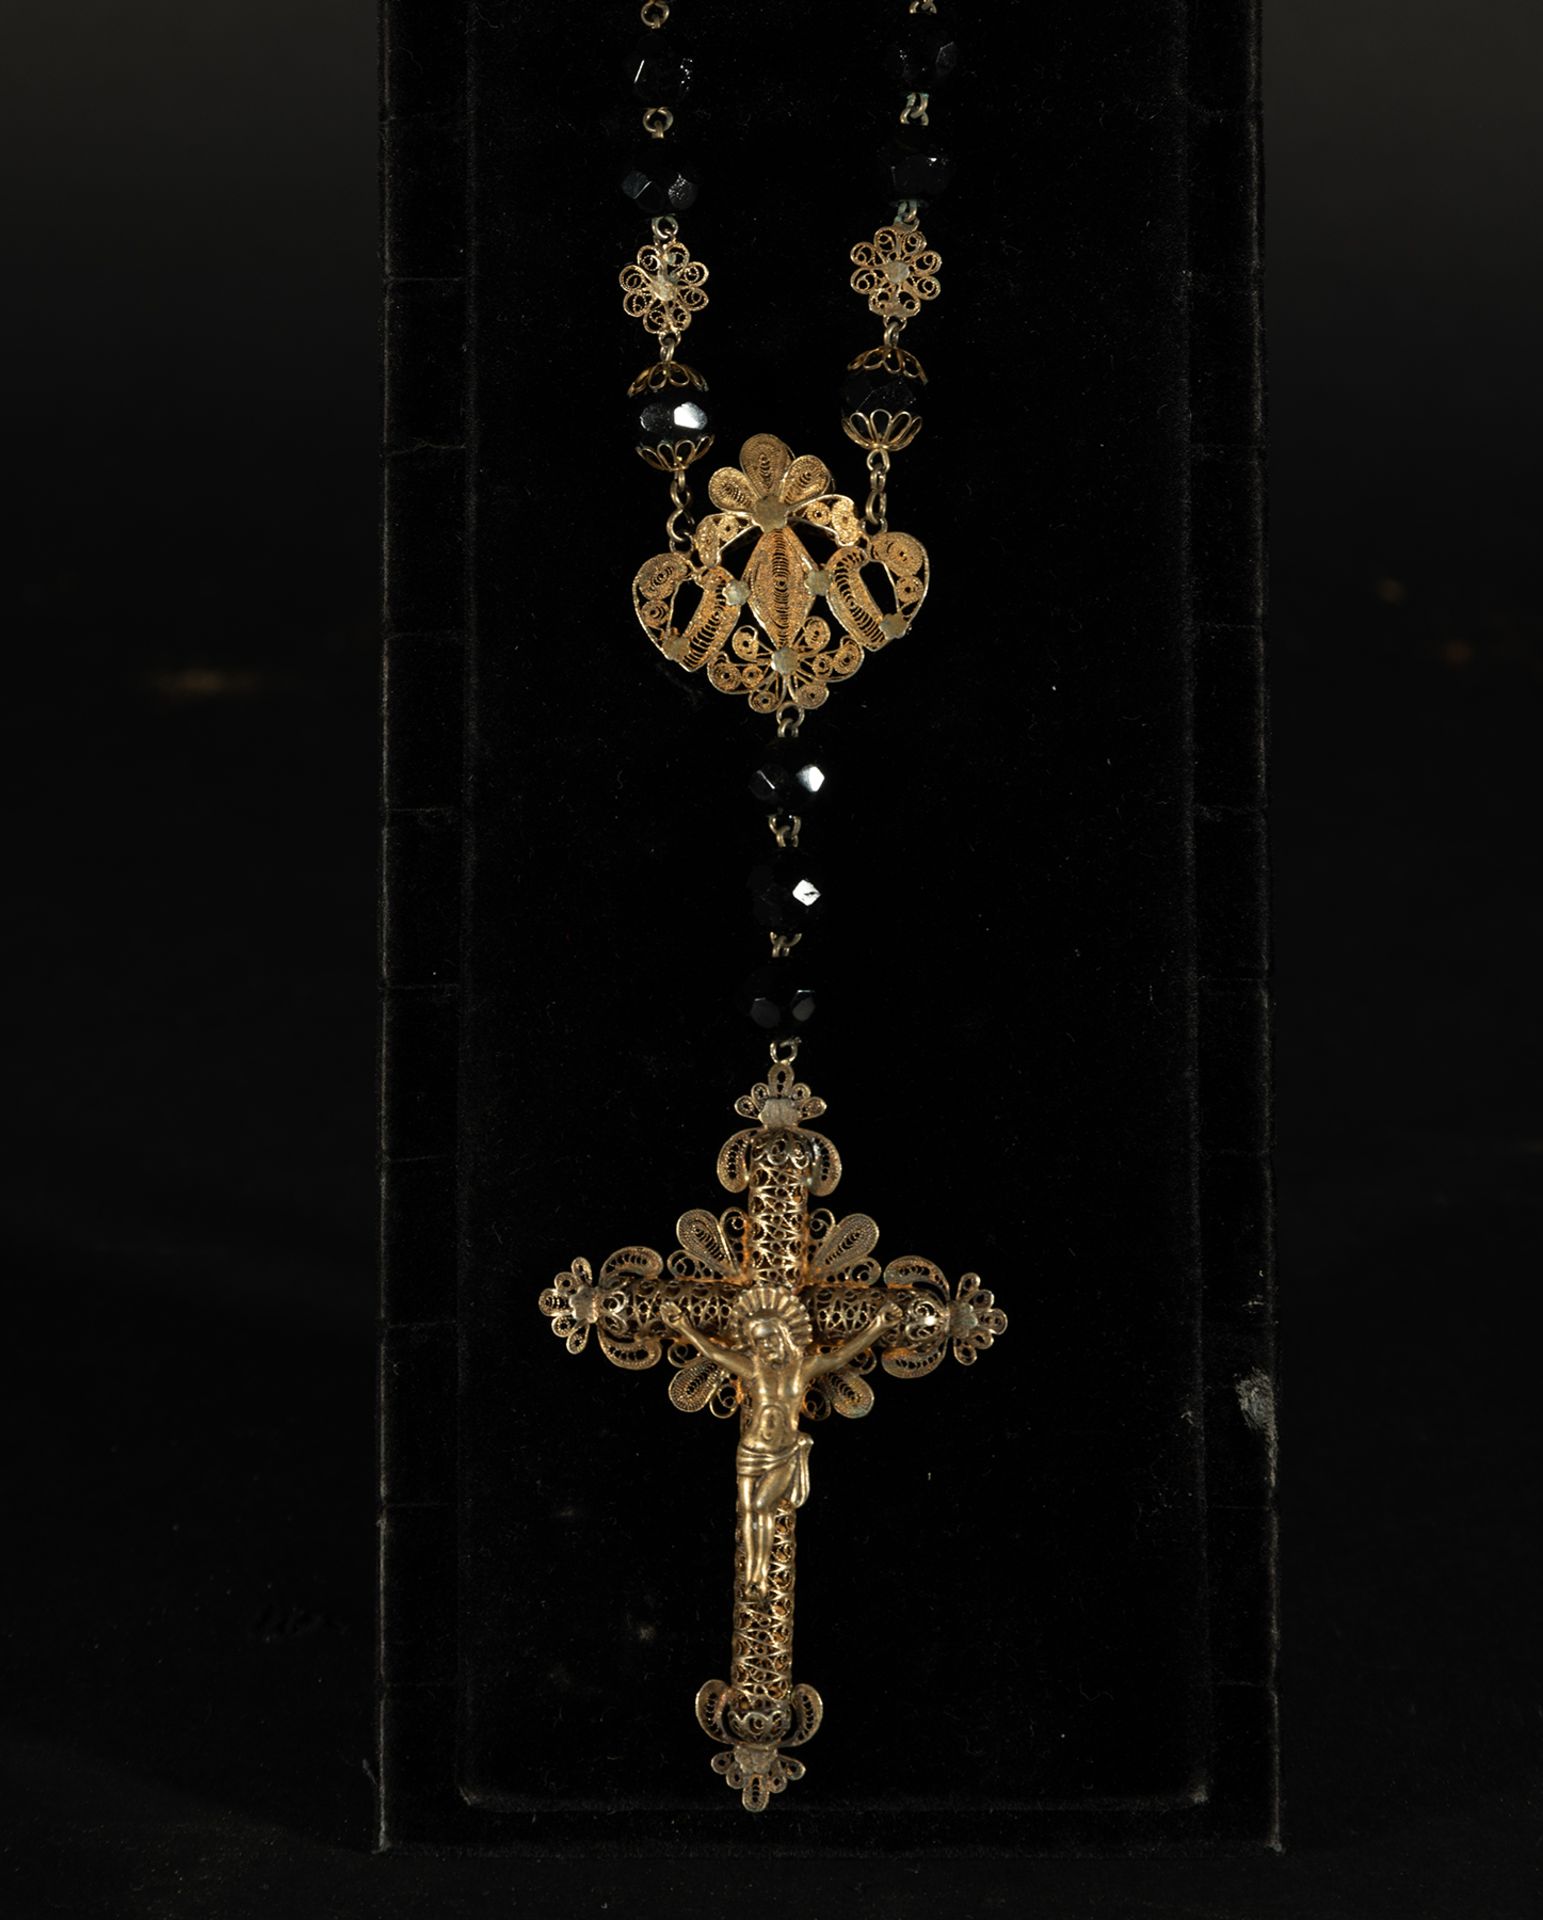 Rosary with Christ in silver and silver-gilt filigree, 19th century